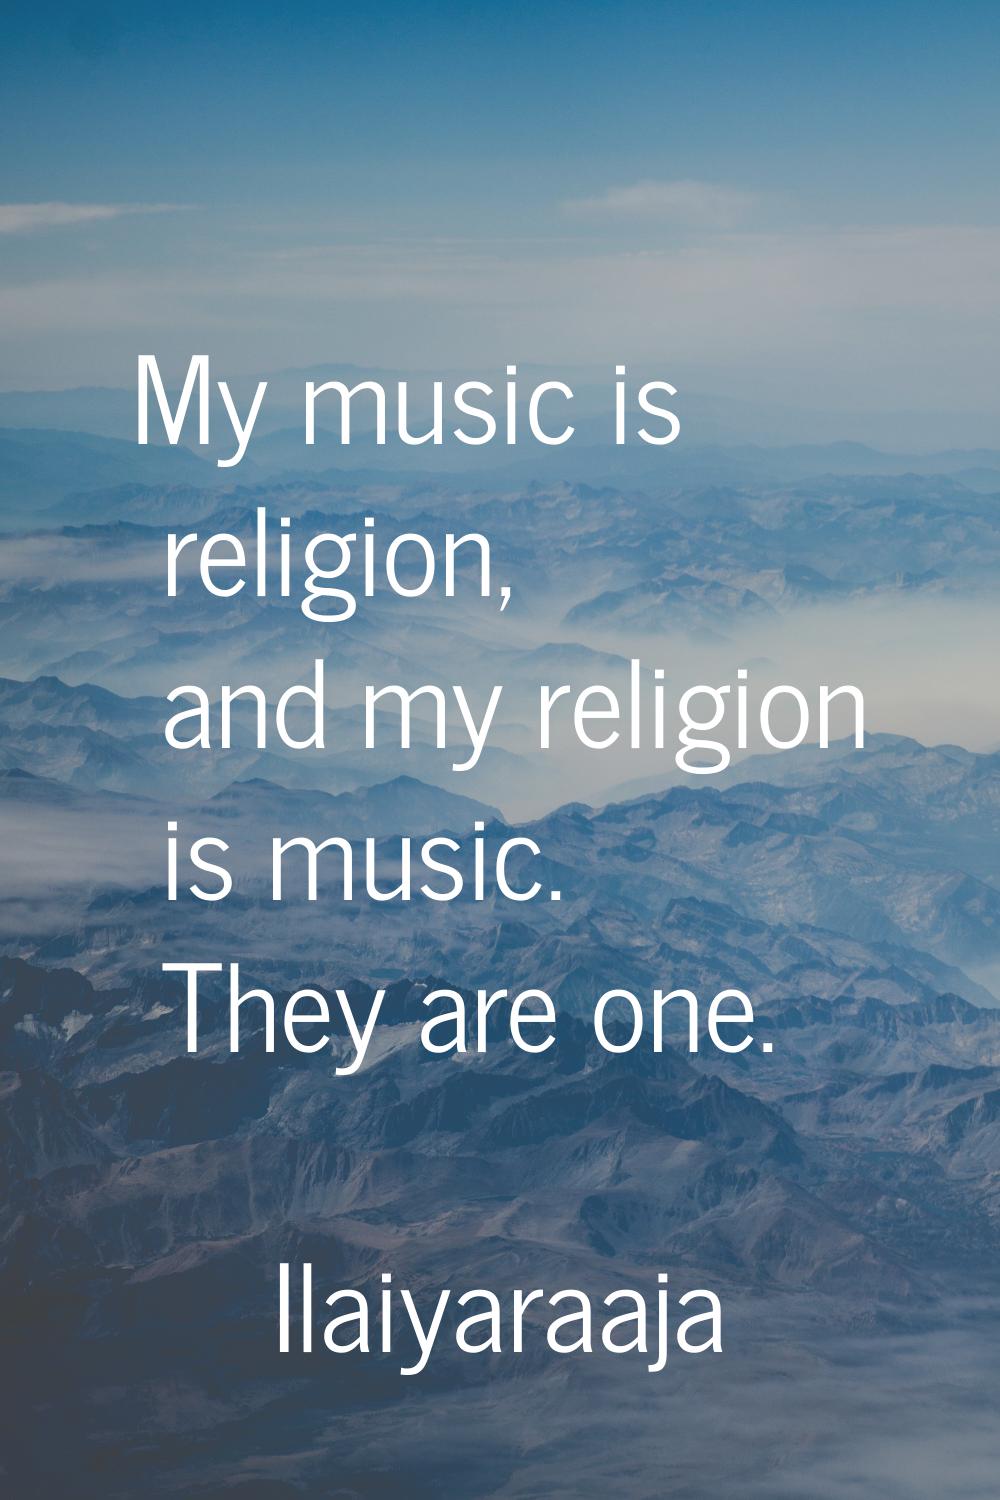 My music is religion, and my religion is music. They are one.